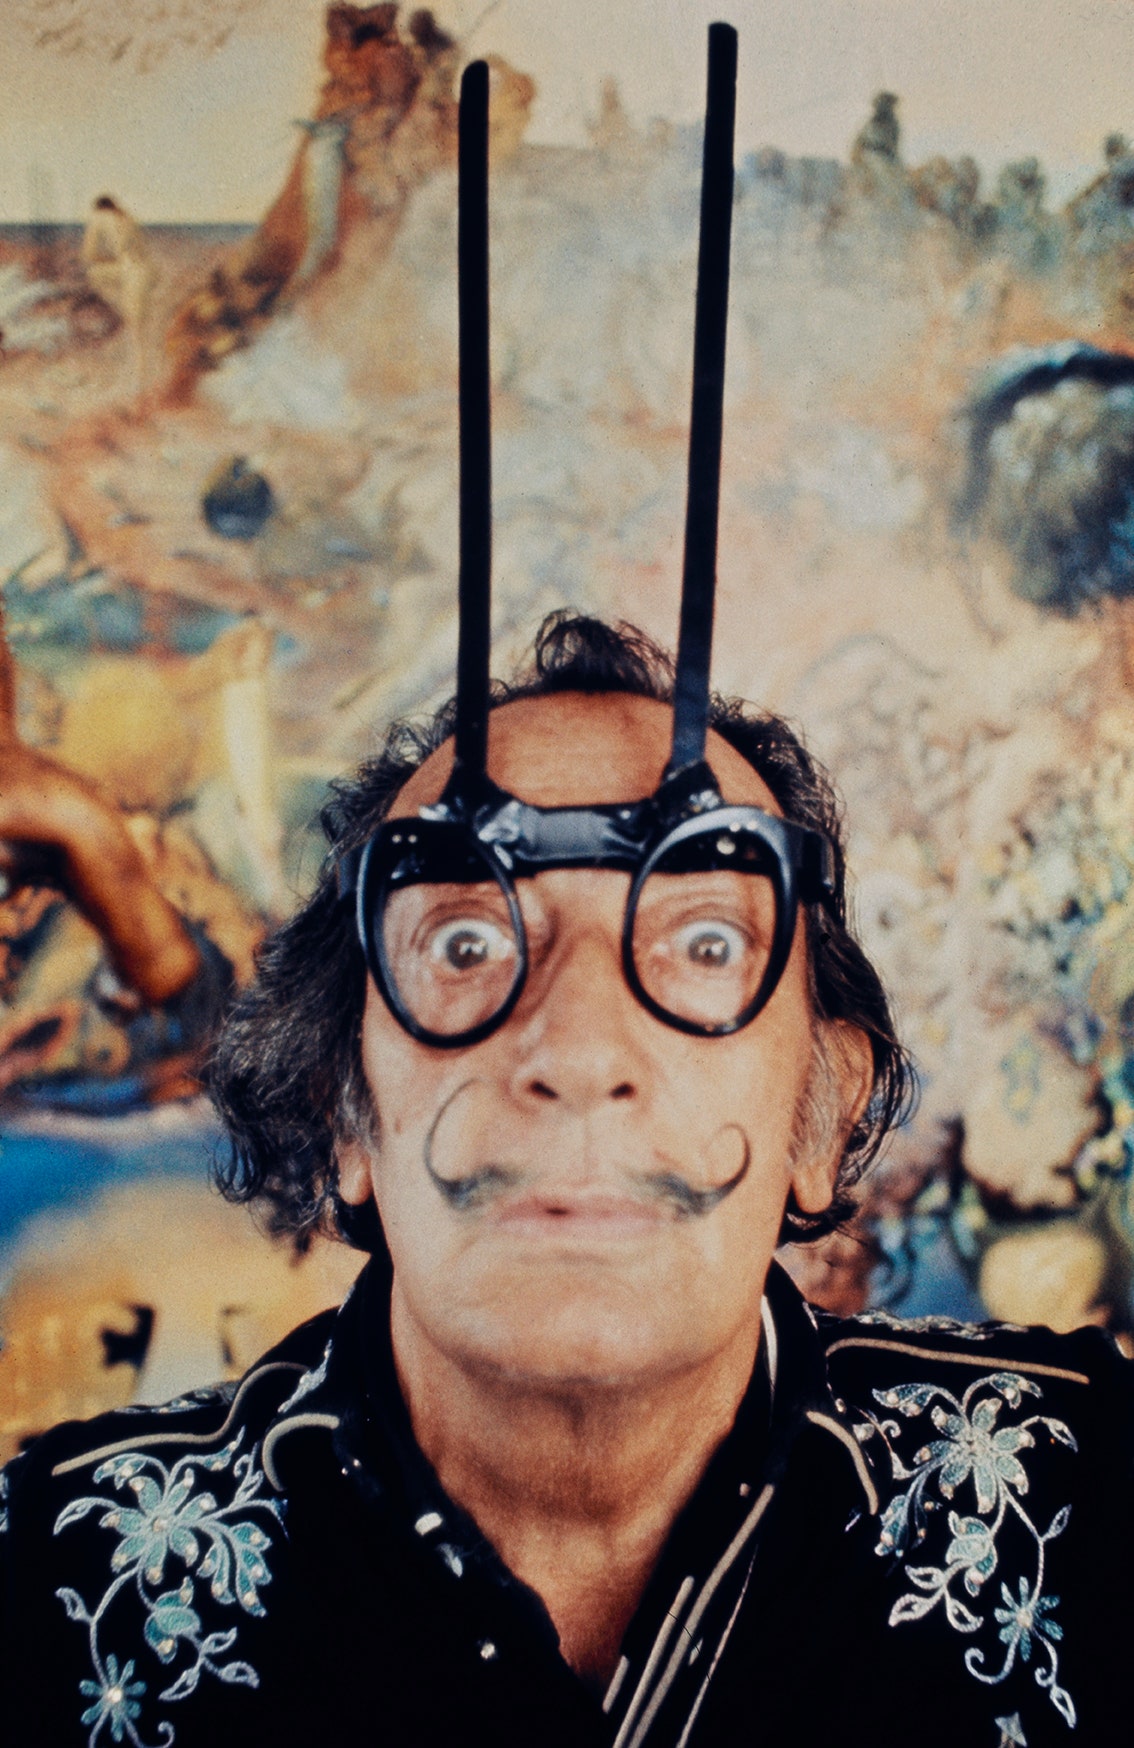 Fundació GalaSalvador Dalí Figueres 2019. Photo by Robert Whitaker. Image rights of Gala and Salvador Dalí reserved.